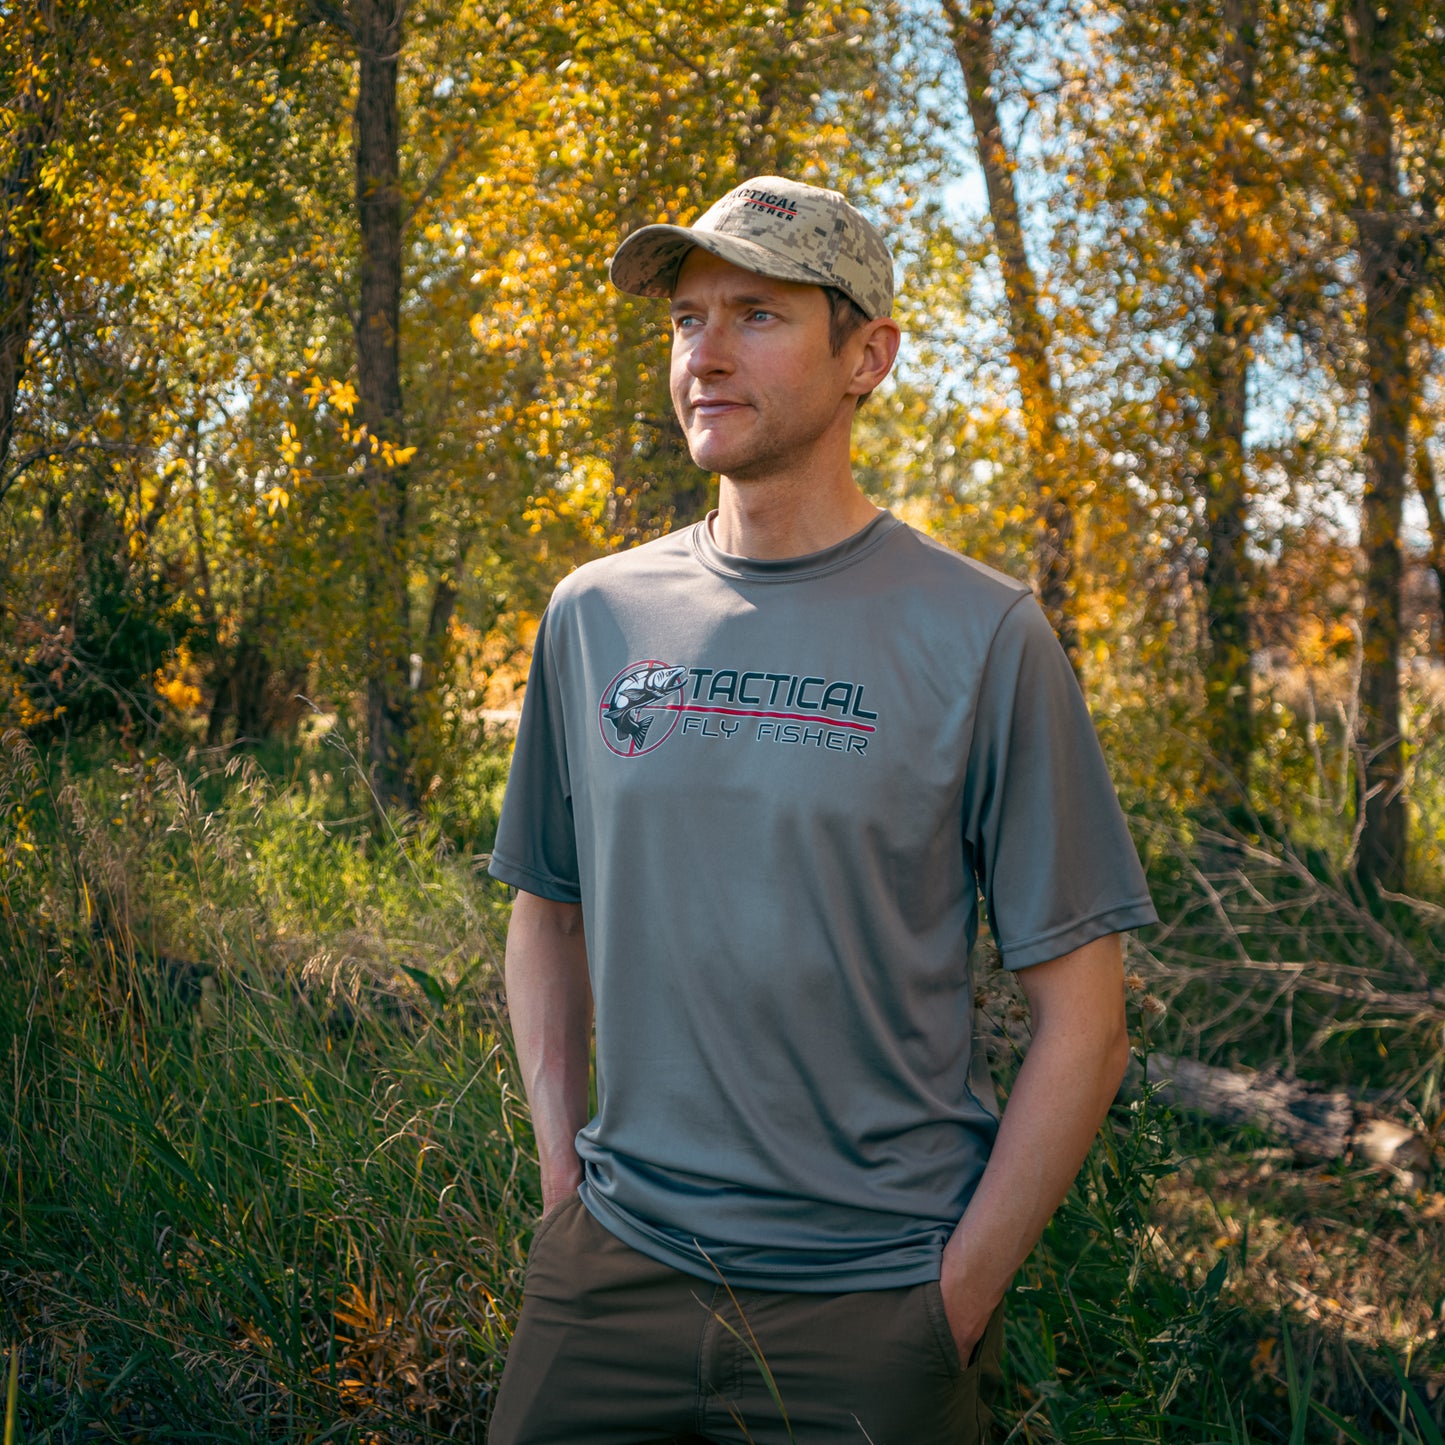 Tactical Fly Fisher T-shirt